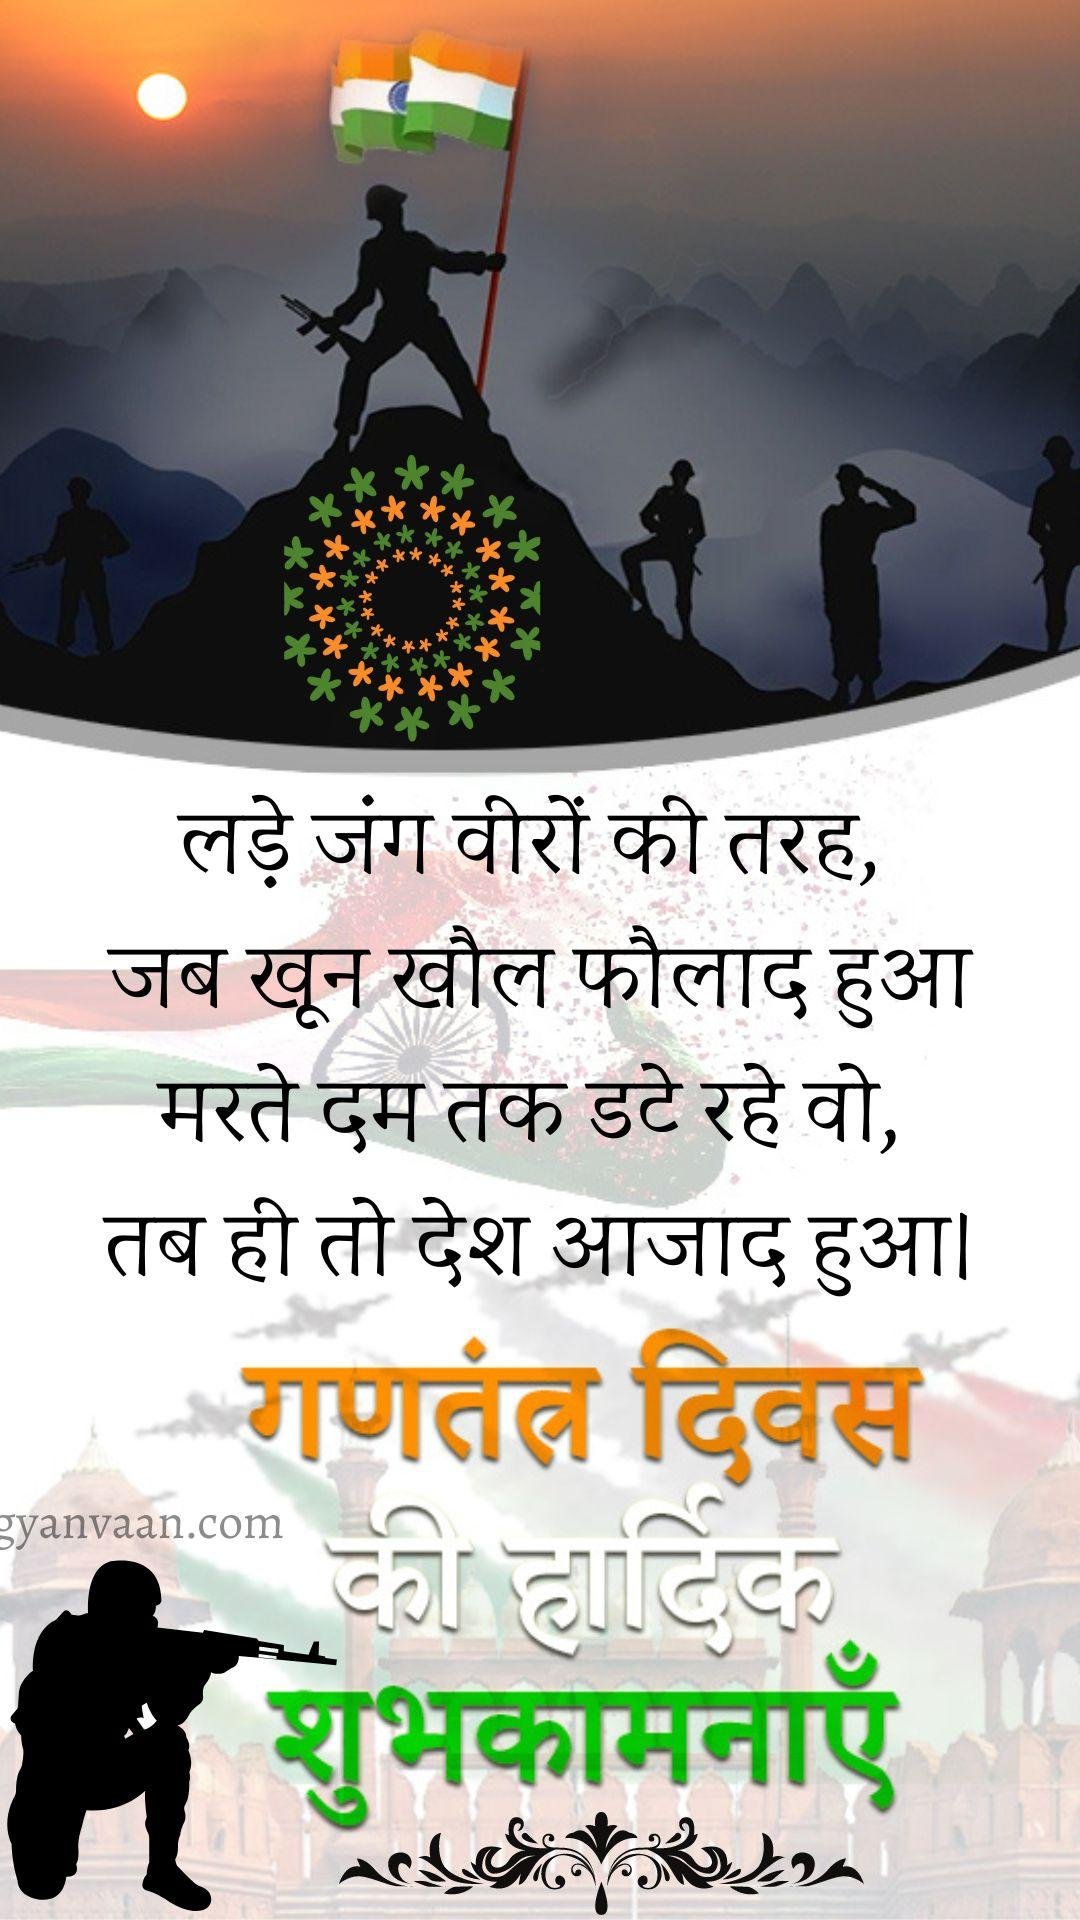 Republic Day Quotes In Hindi With Status And Shayari 9 - Republic Day Quotes In Hindi